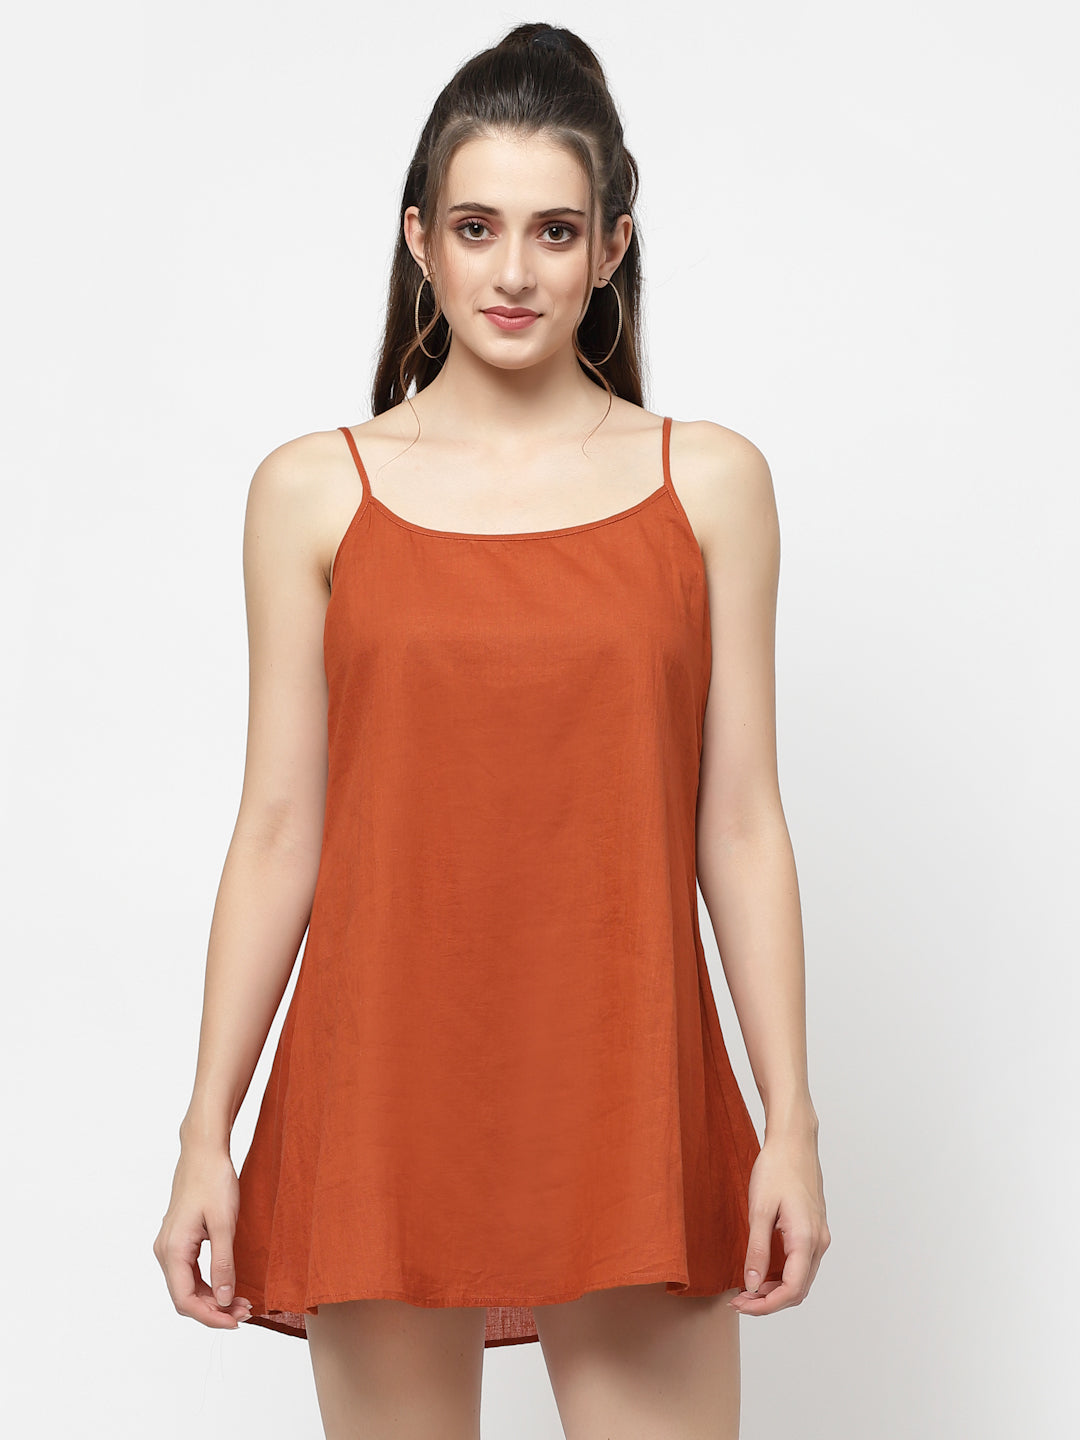 Terquois A-line Casual Dress Emblished with Lace Has Round Neck Dresses TERQUOIS   